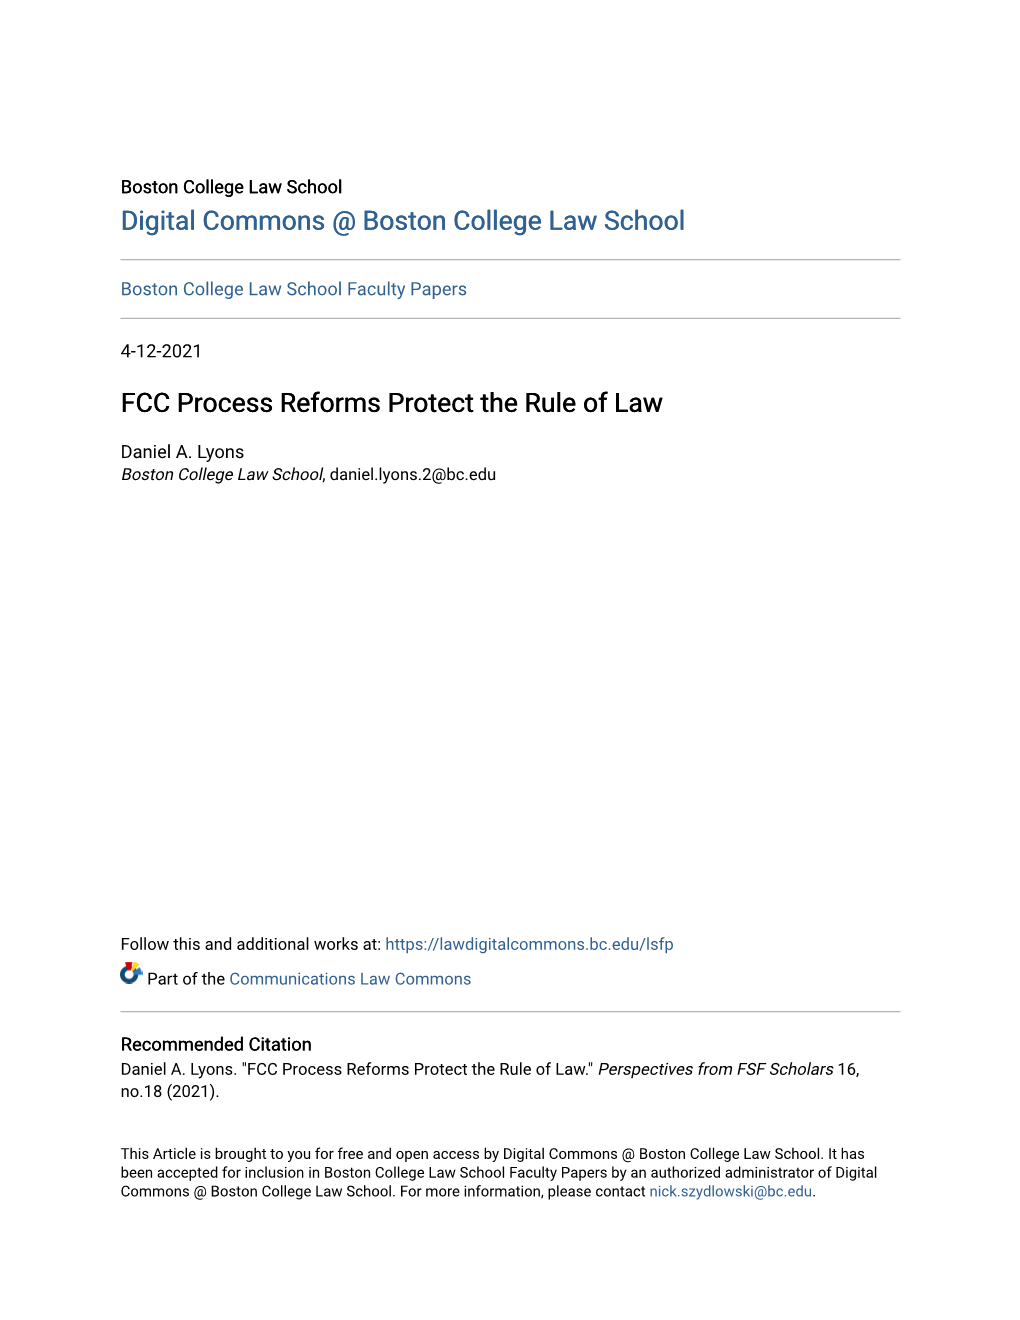 FCC Process Reforms Protect the Rule of Law